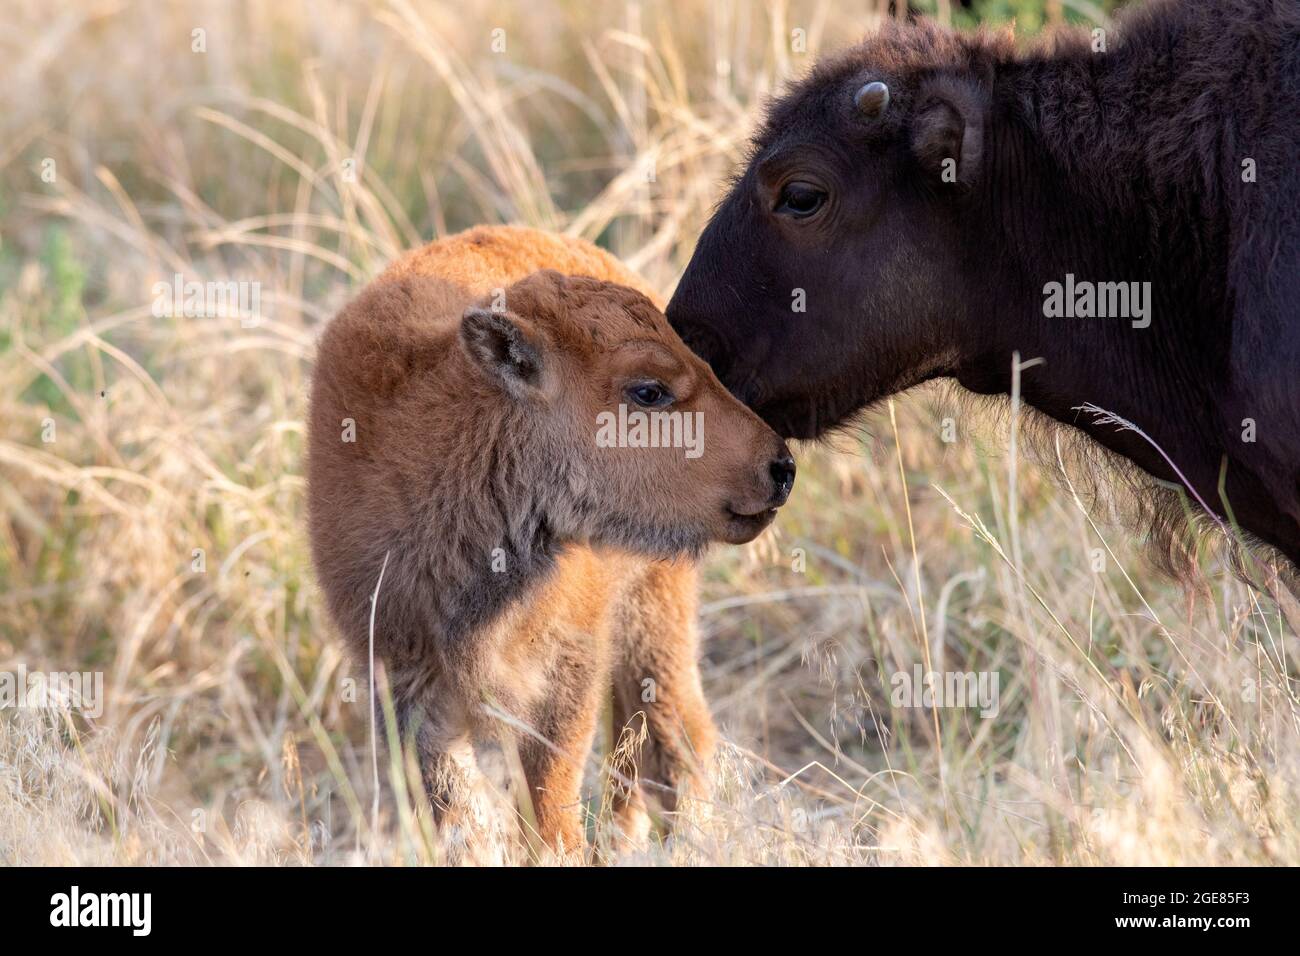 American Bison (Bison bison) calf nuzzling another young bison - Rocky Mountain Arsenal National Wildlife Refuge, Commerce City, near Denver, Colorado Stock Photo